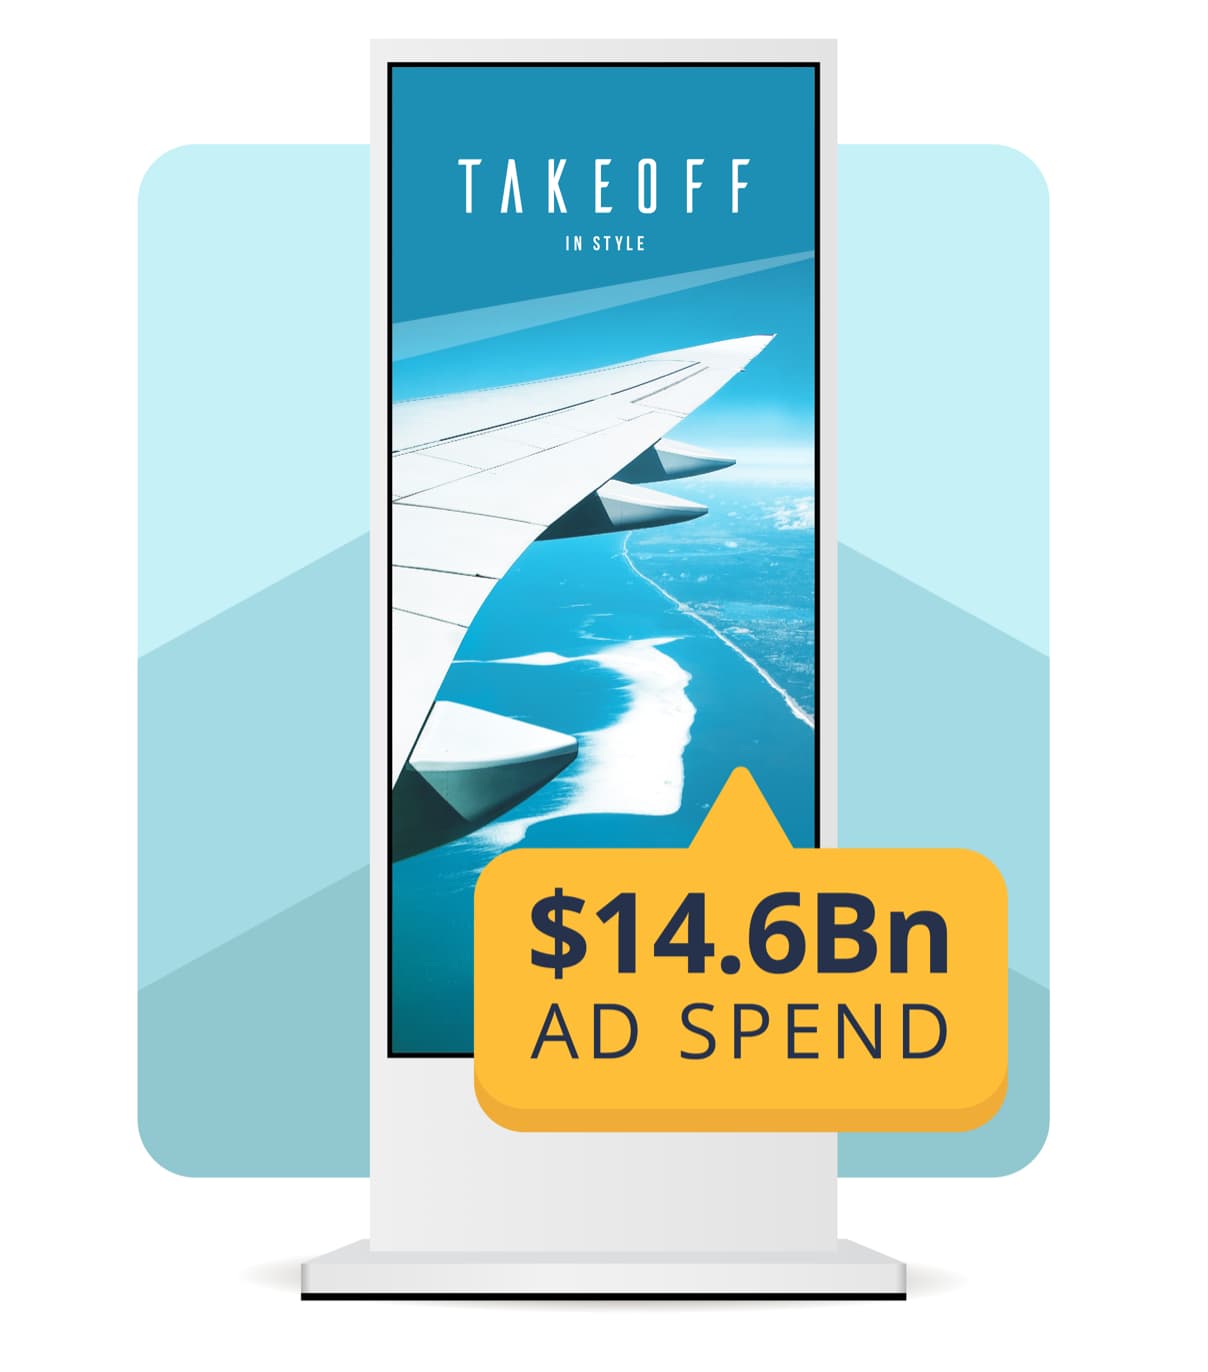 DOOH ad spend is growing fast